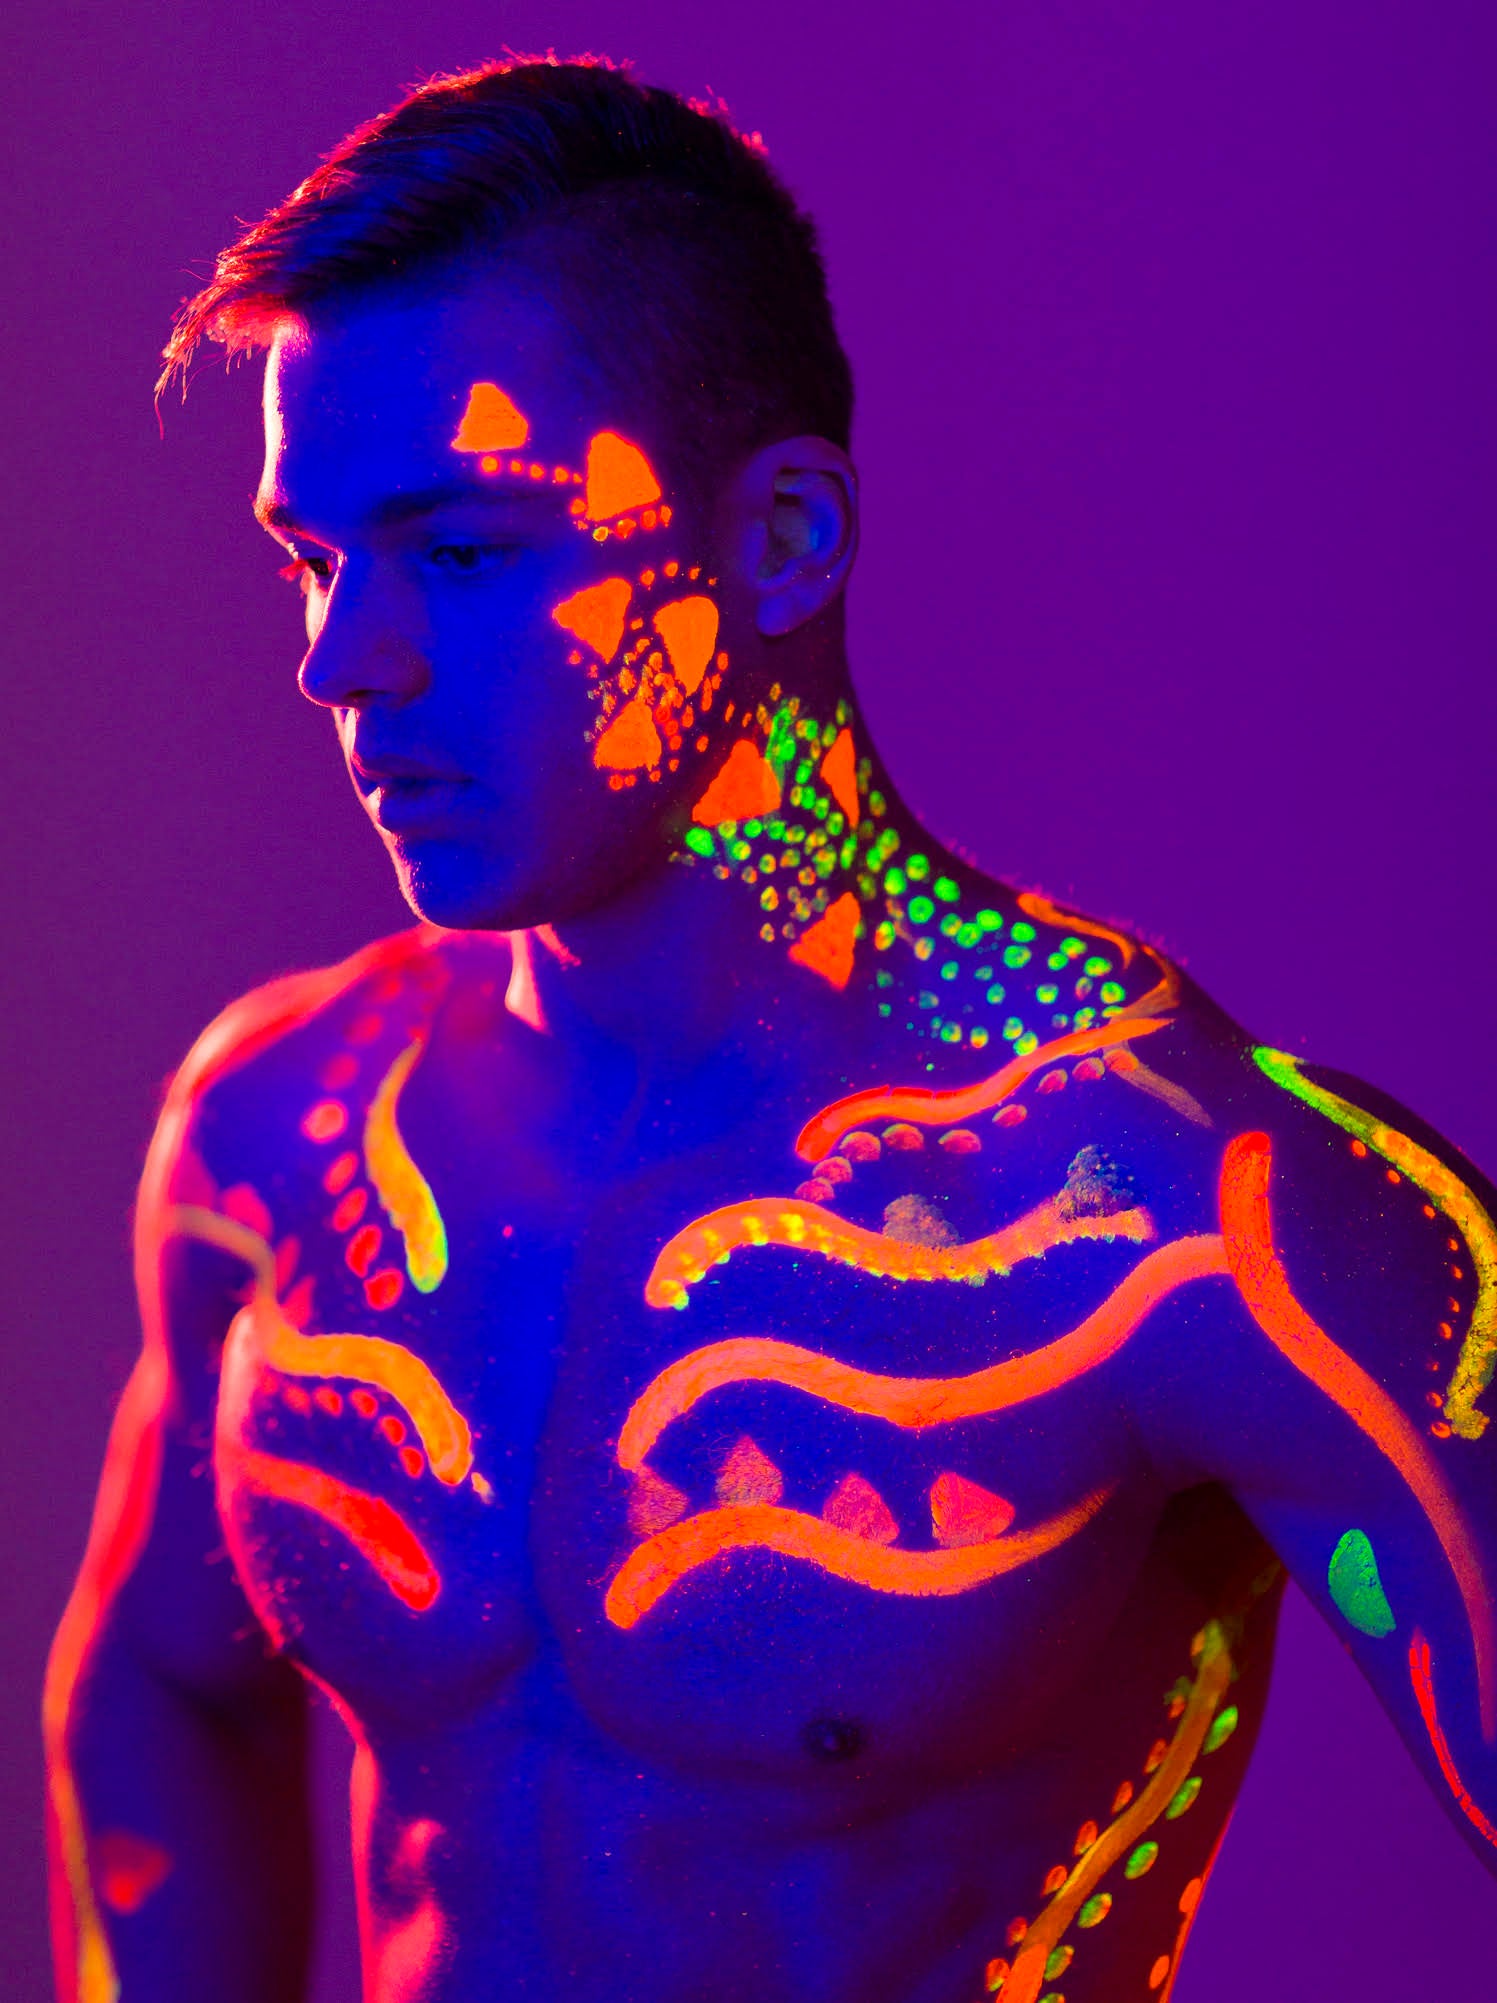 Glow in the dark body paint : r/woahdude